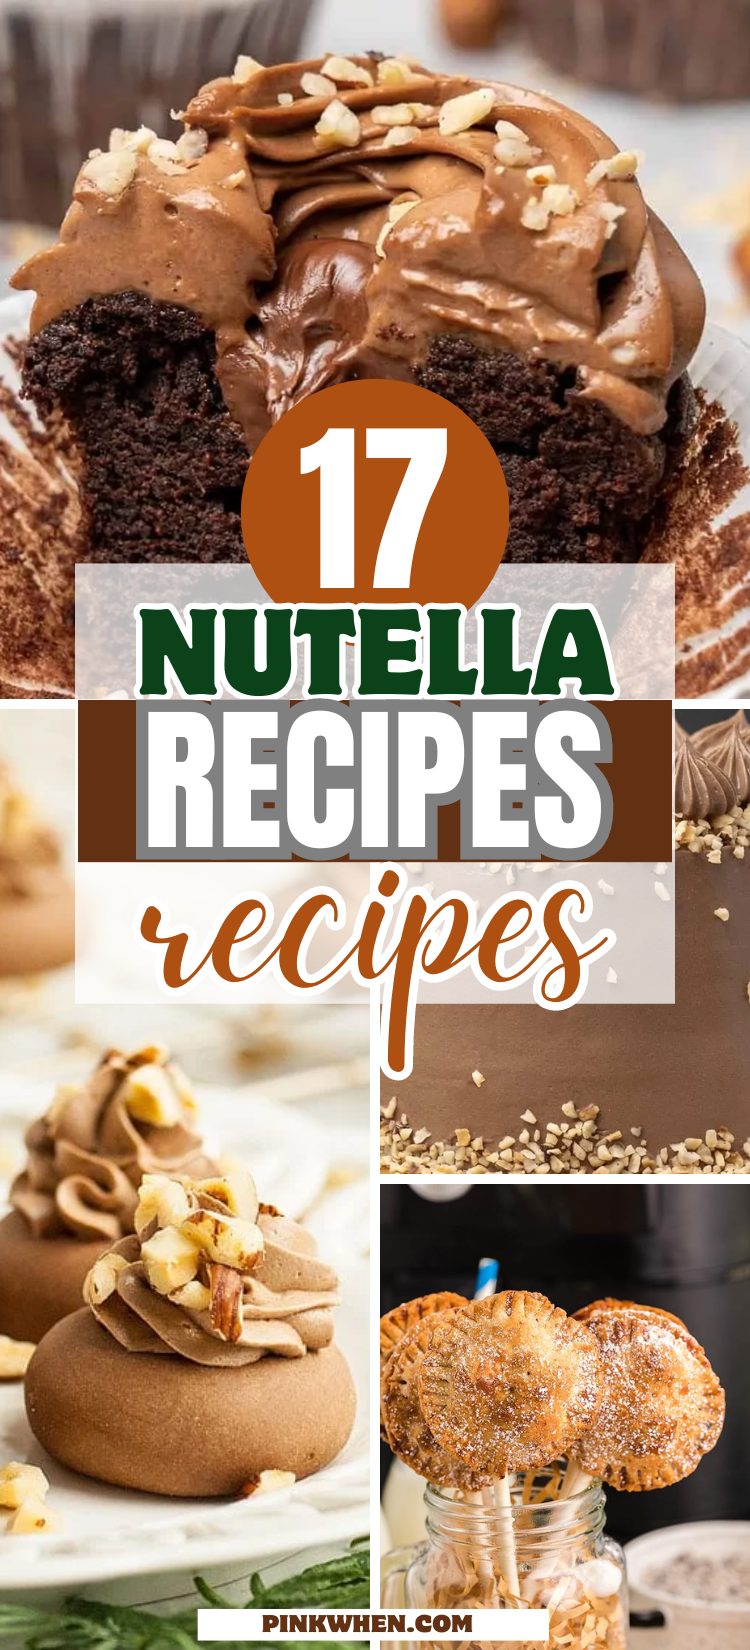 You’ll Go Nuts for These 17 Nutella Recipes